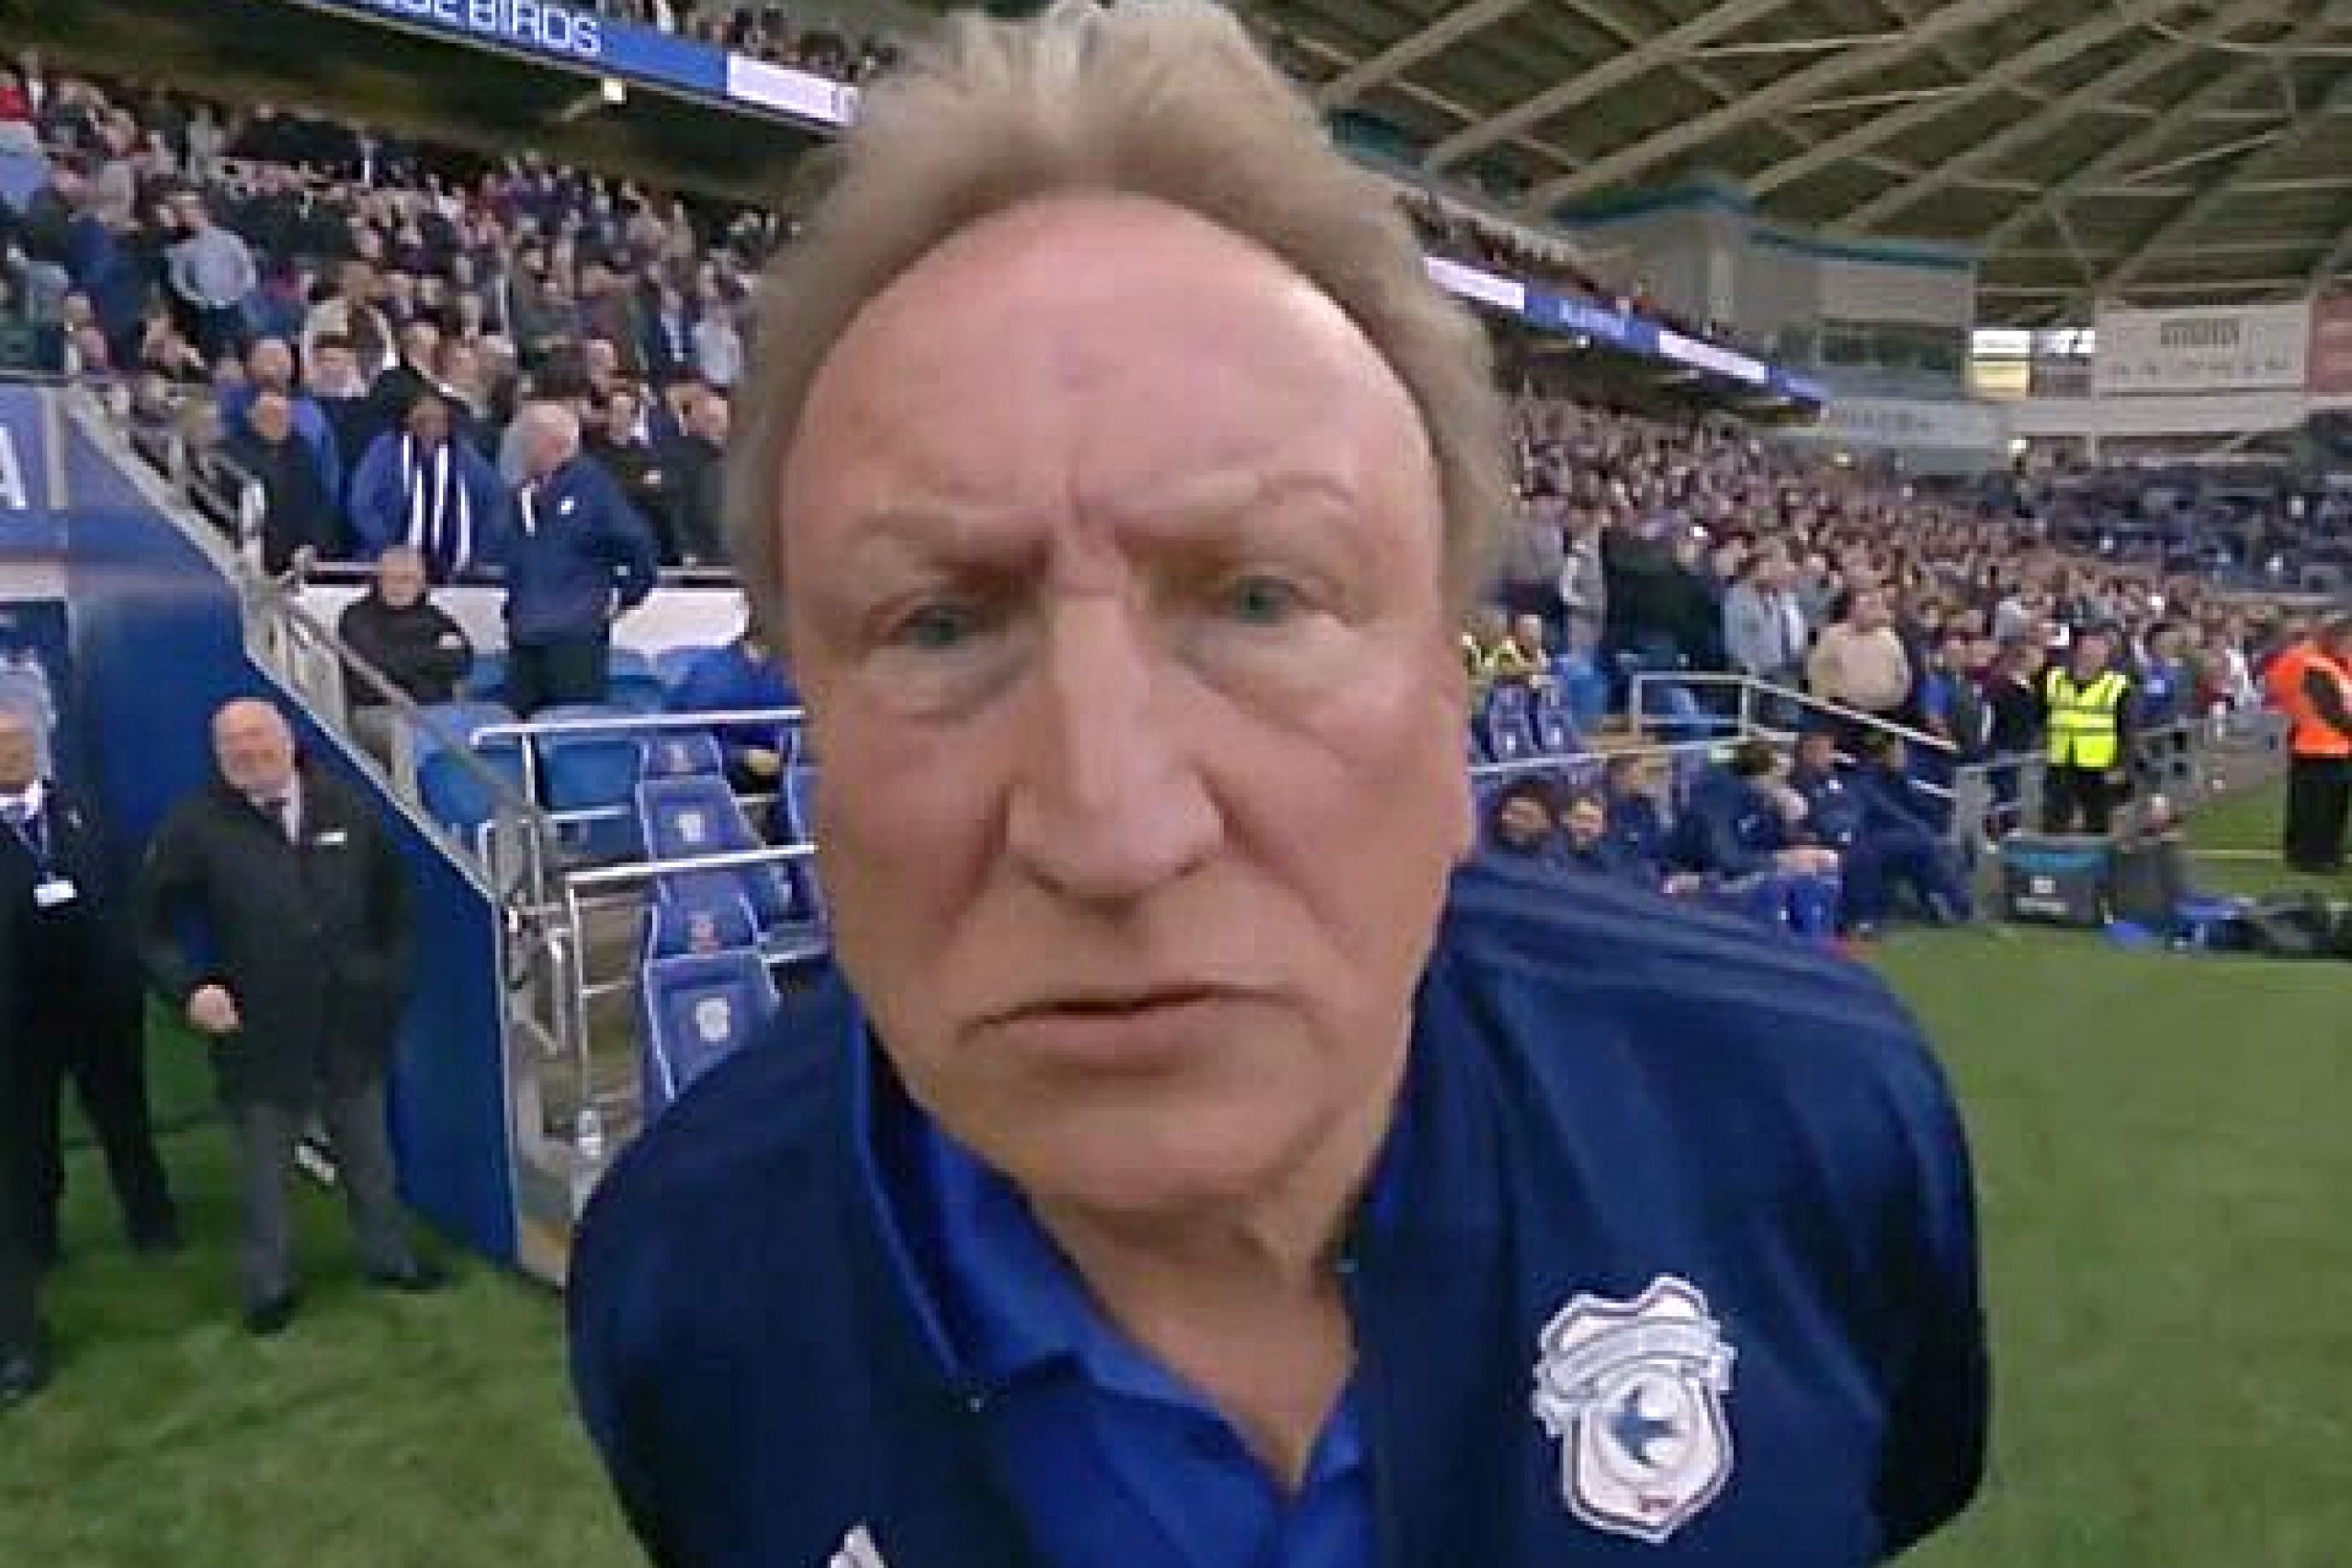 Have a day off Neil – Boro boss Neil Warnock caught on cam abusing refs in an under 23s game